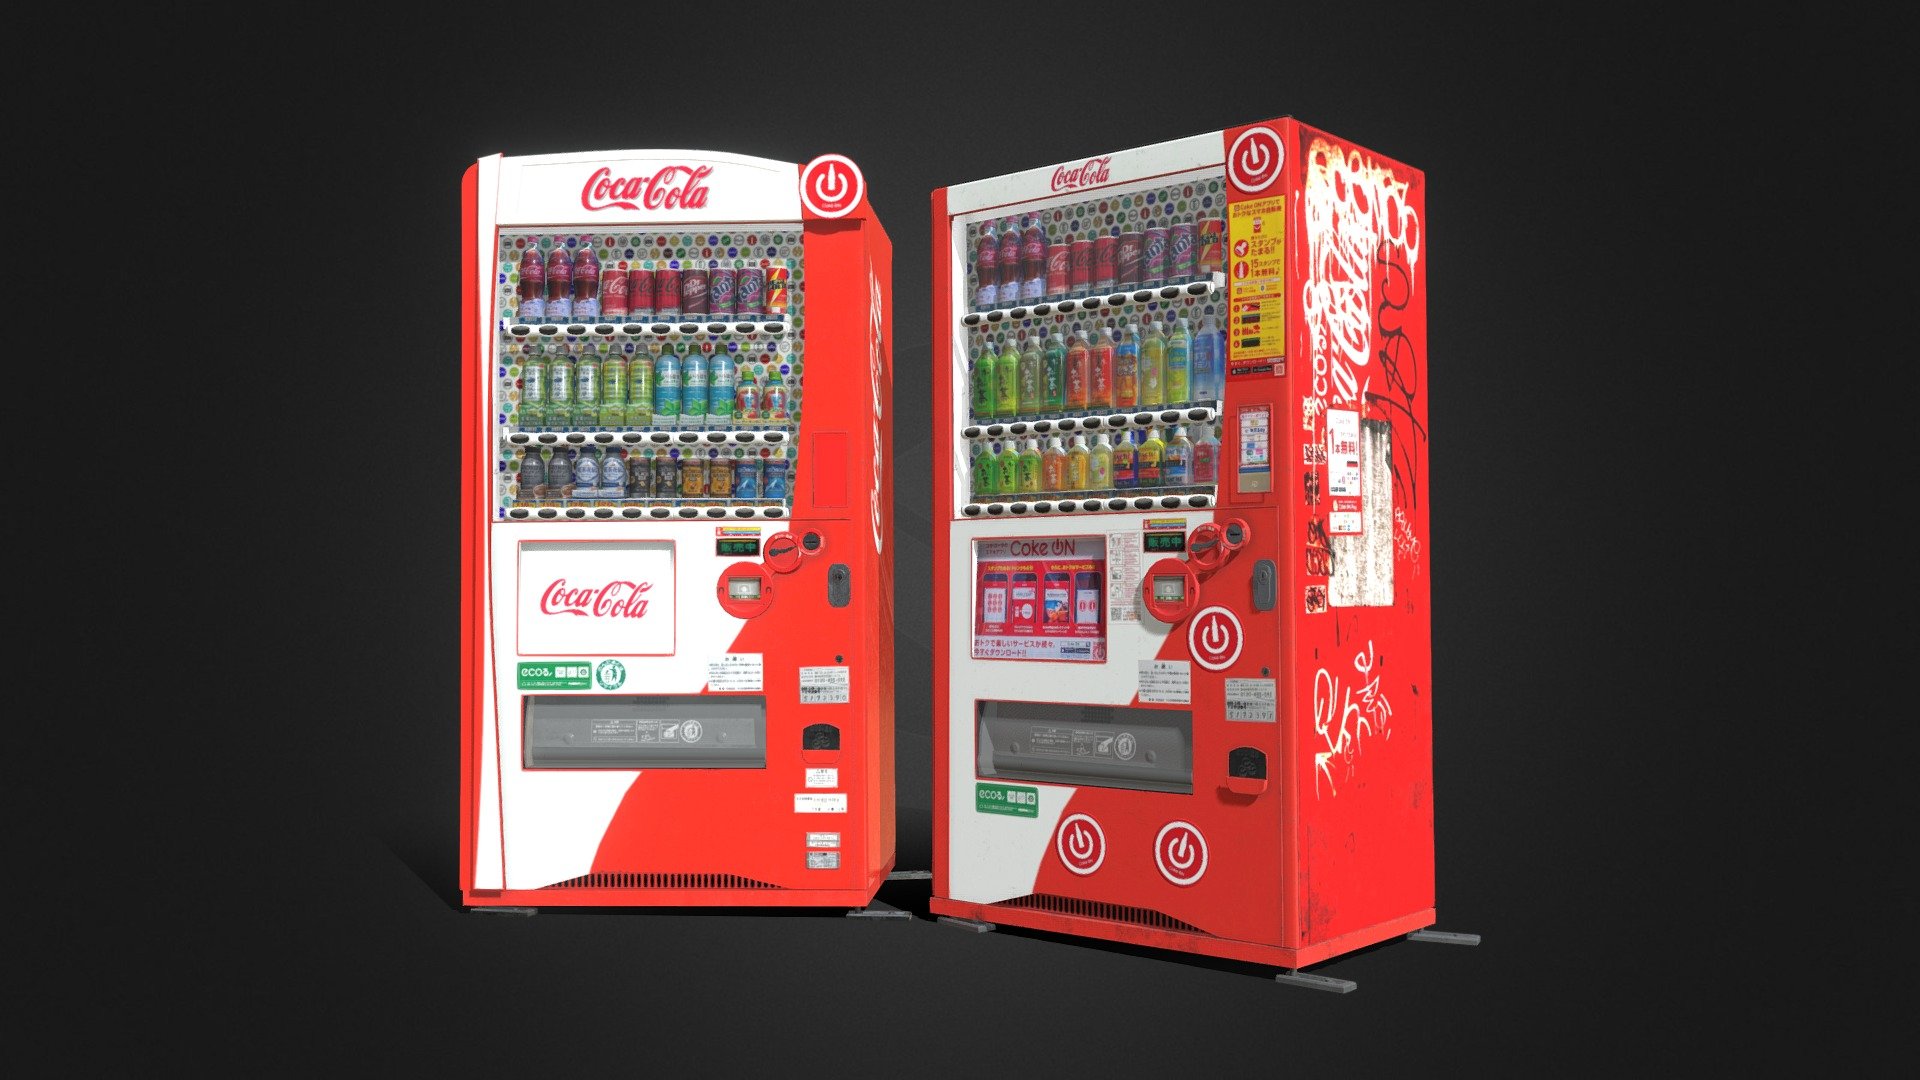 Pack of 2 Japanese Coke Vending Machines, one worn and with graffiti, the other one clean and shiny, both can be found in Japanese streets with a variety of beverages. Each Machine has two materials, one for the drinks and the other one for the machine itself. Textures are 4K resolution, PBR workflow 3d model